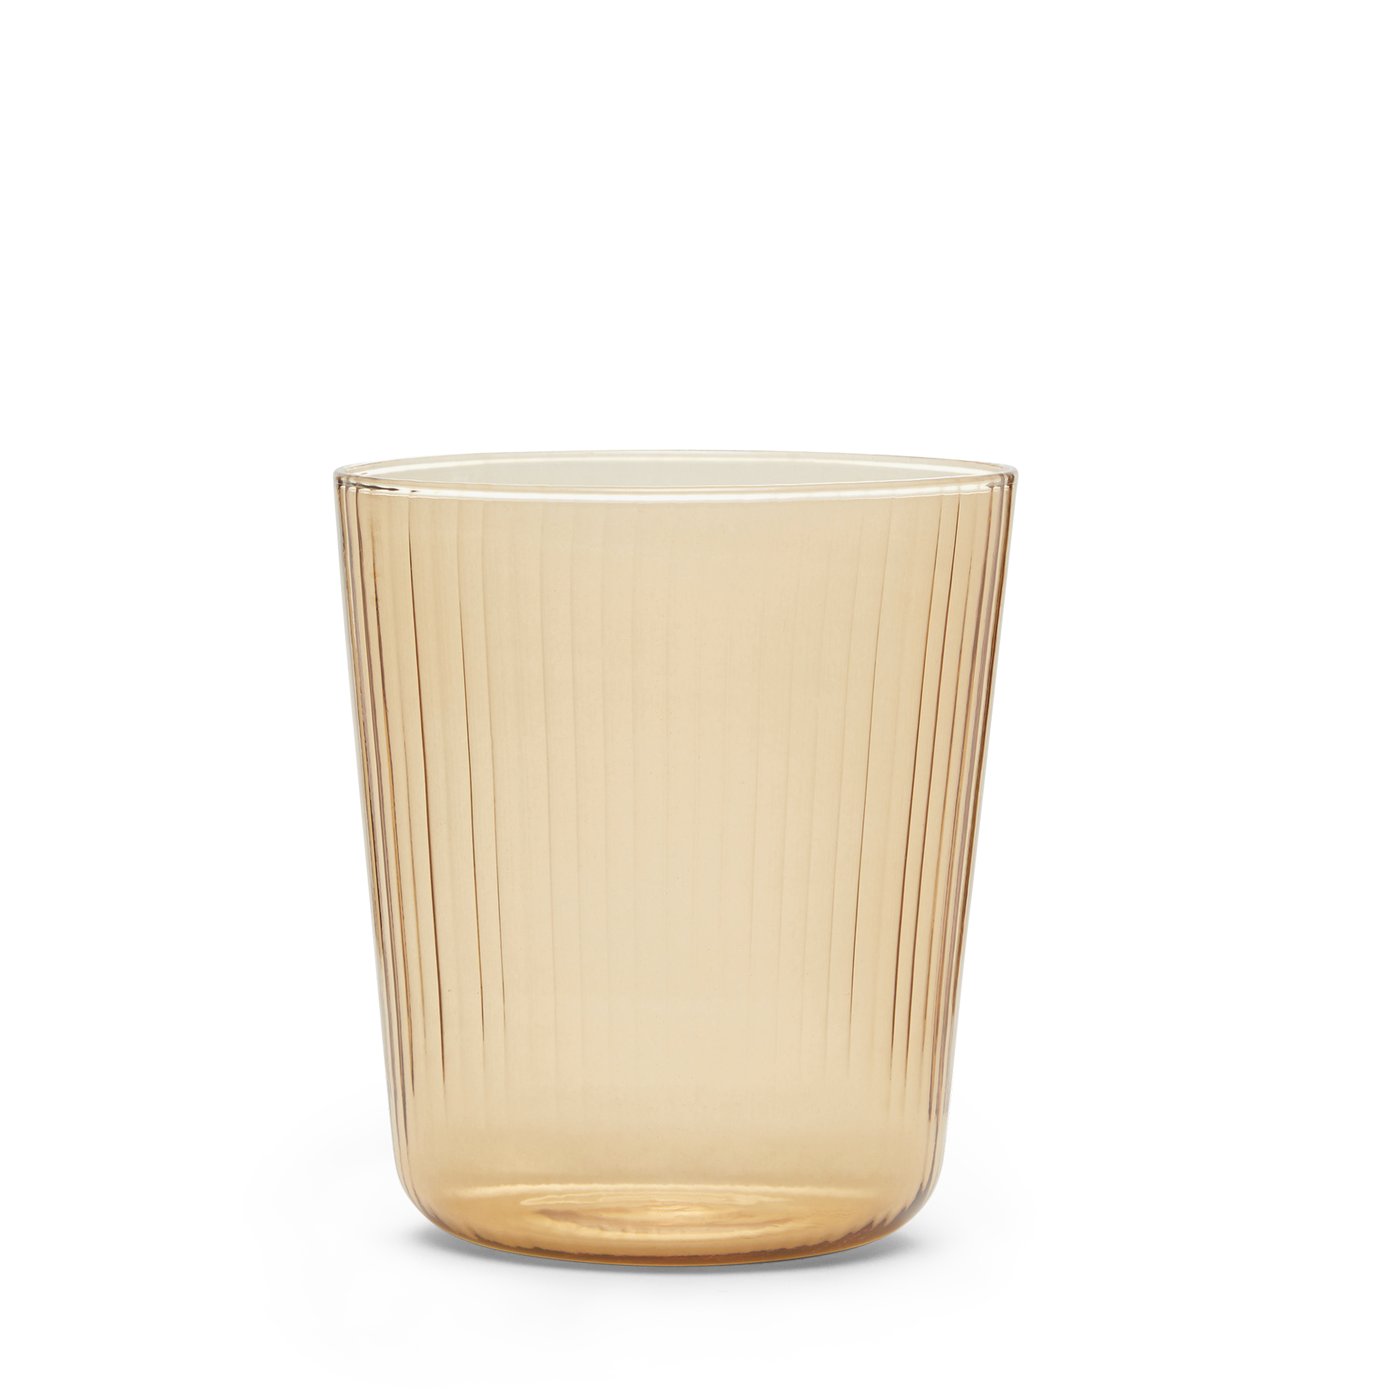 R+D.LAB Luisa Carafe and Glass Set for Men